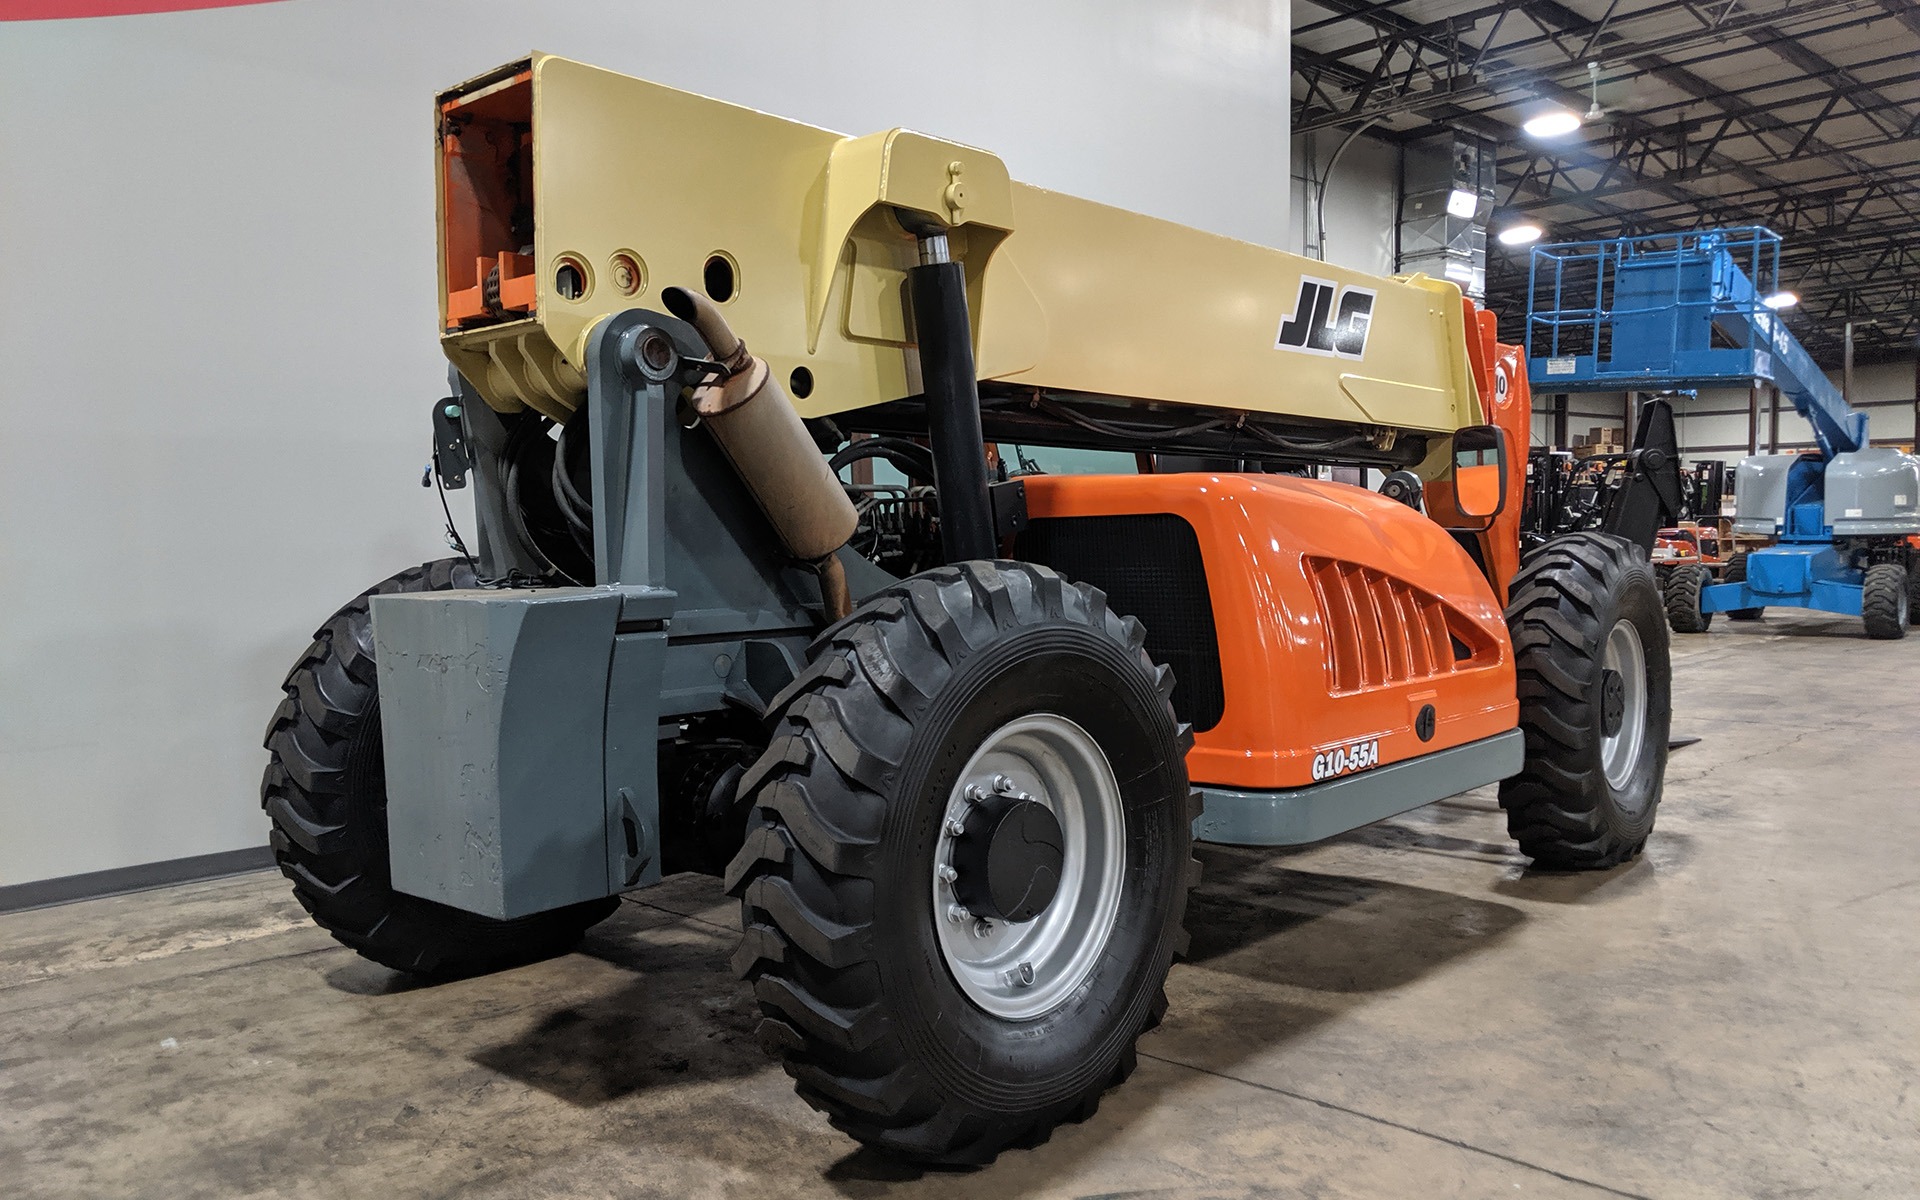 Used 2009 JLG G10-55A  | Cary, IL